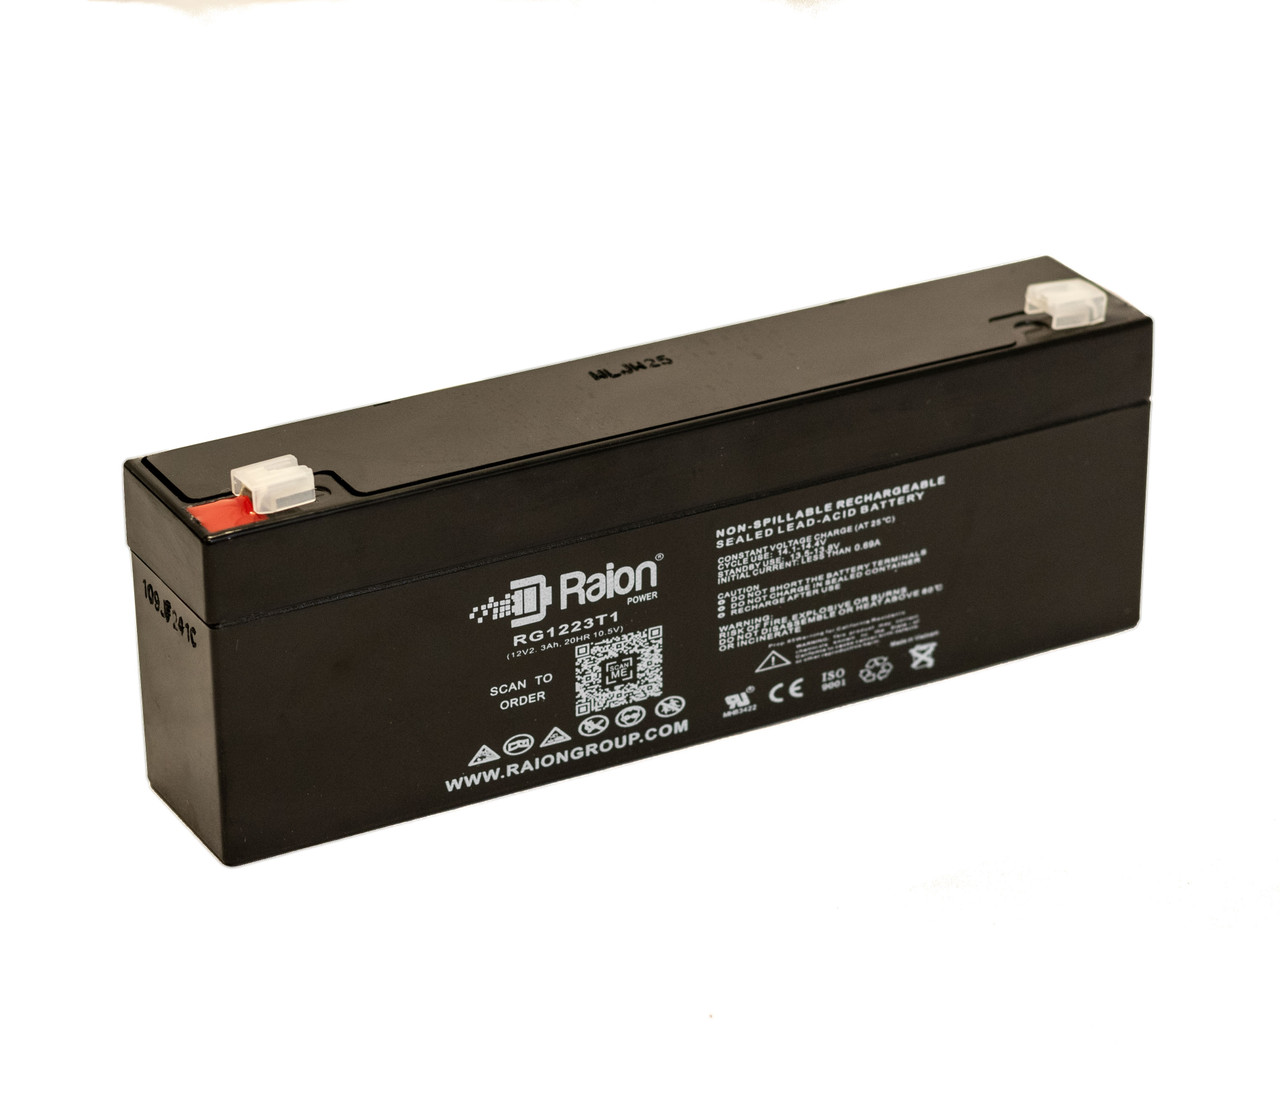 Raion Power RG1223T1 Replacement Battery for Douglas DBG121.8